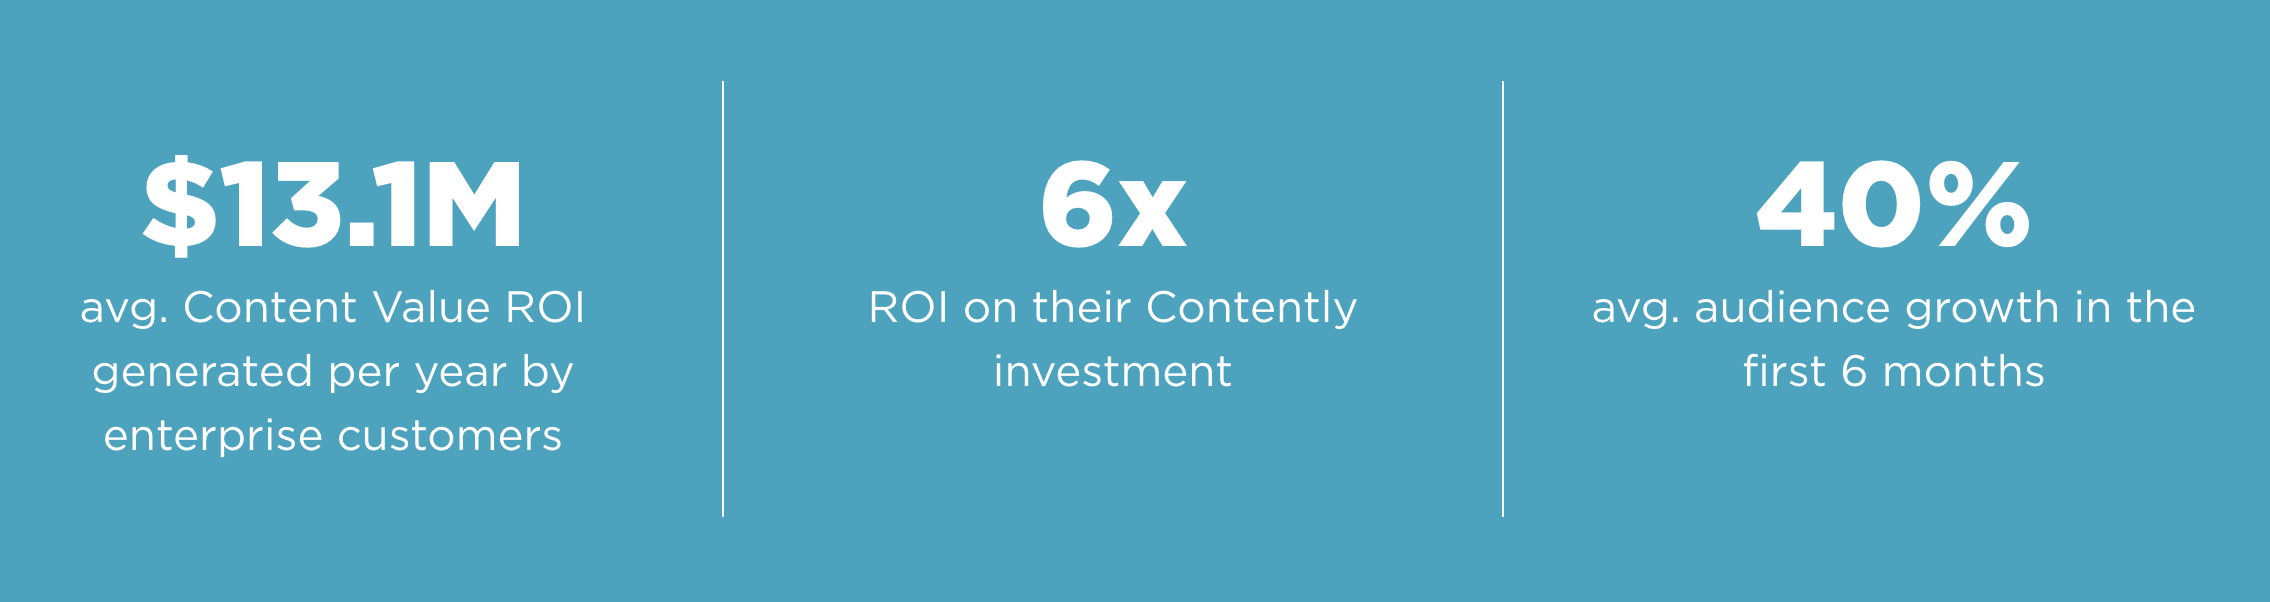 content value ROI with Contently